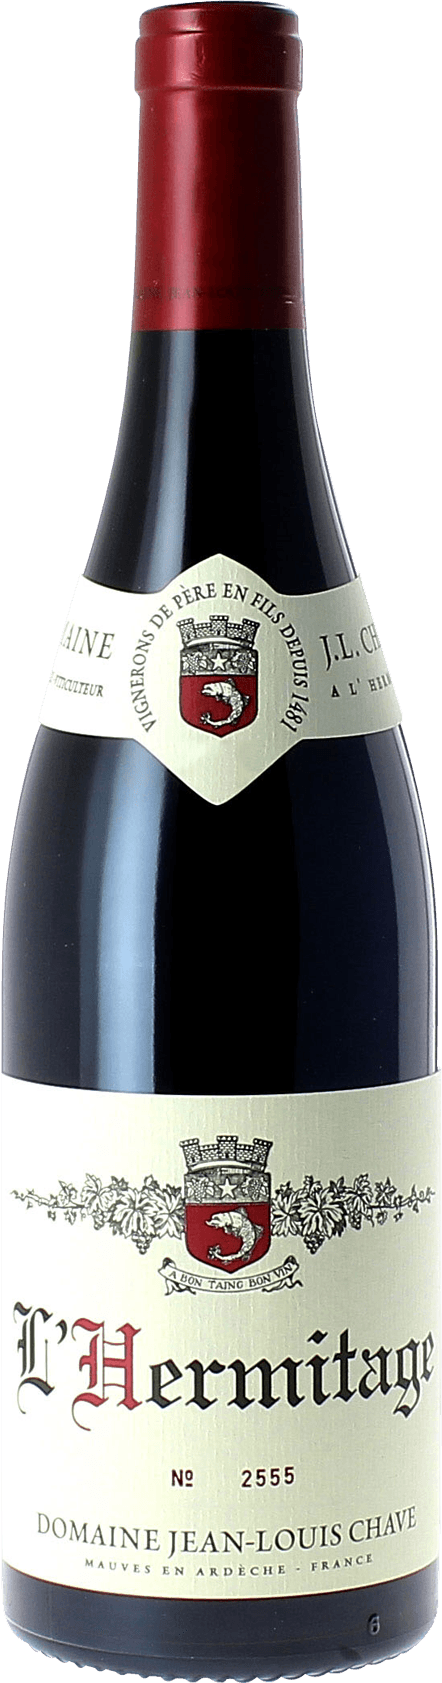 Hermitage rouge jean-louis chave 2015  Hermitage, Valle du Rhne Rouge